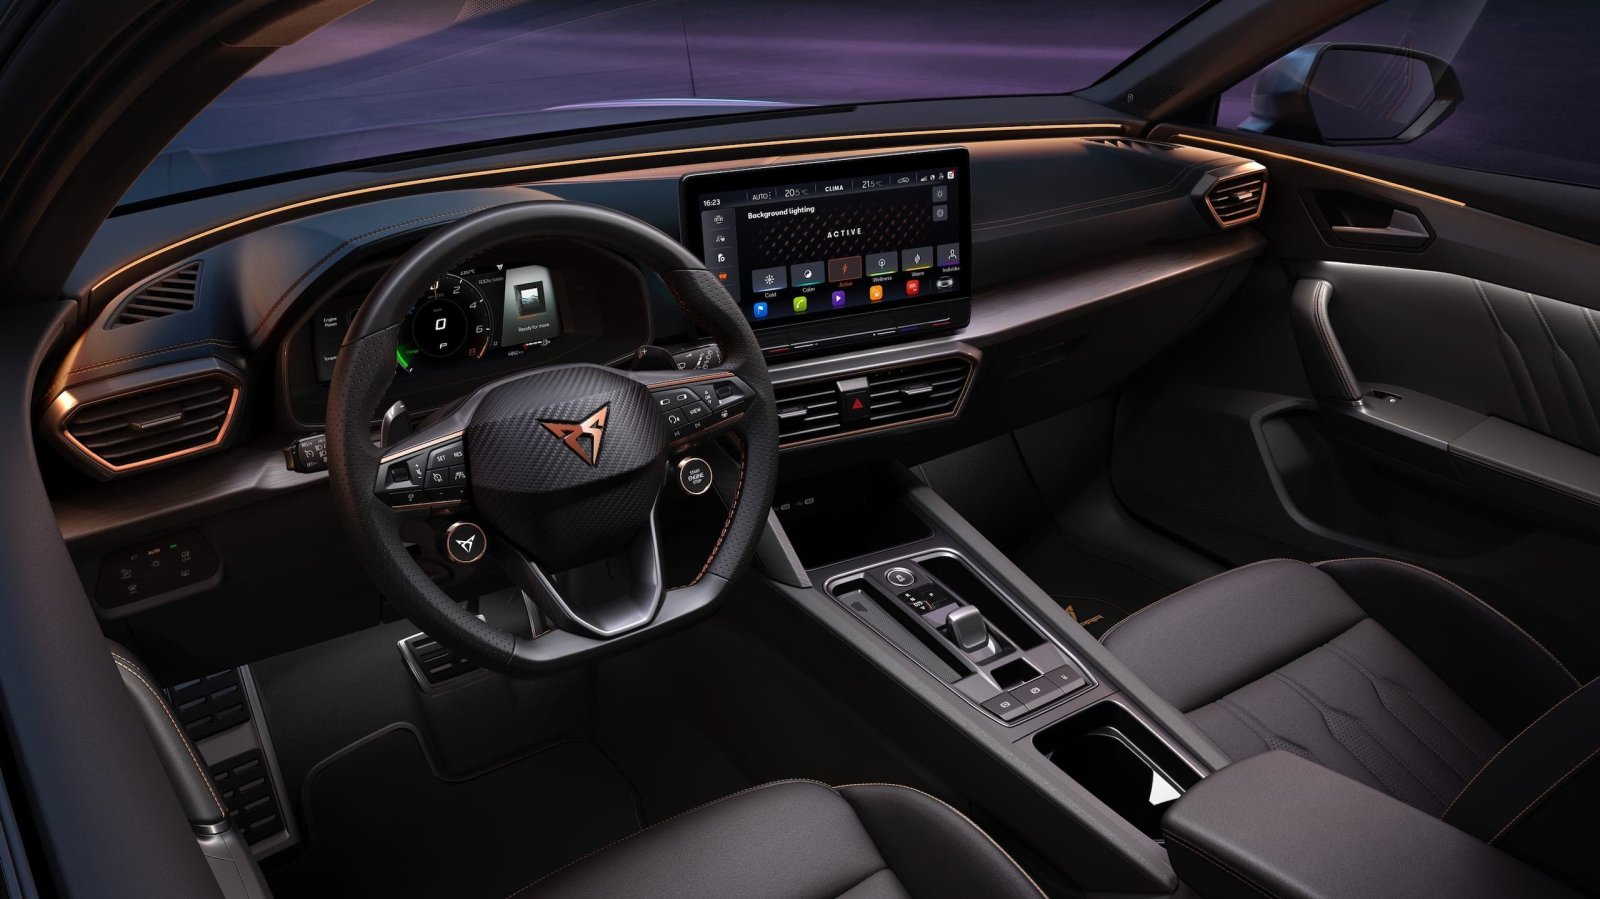 new-cupra-leon-5-door-ehybrid-compact-sports-car-interior-view-of-dashboard-with-leather-steering-wheel-and-ambient-light